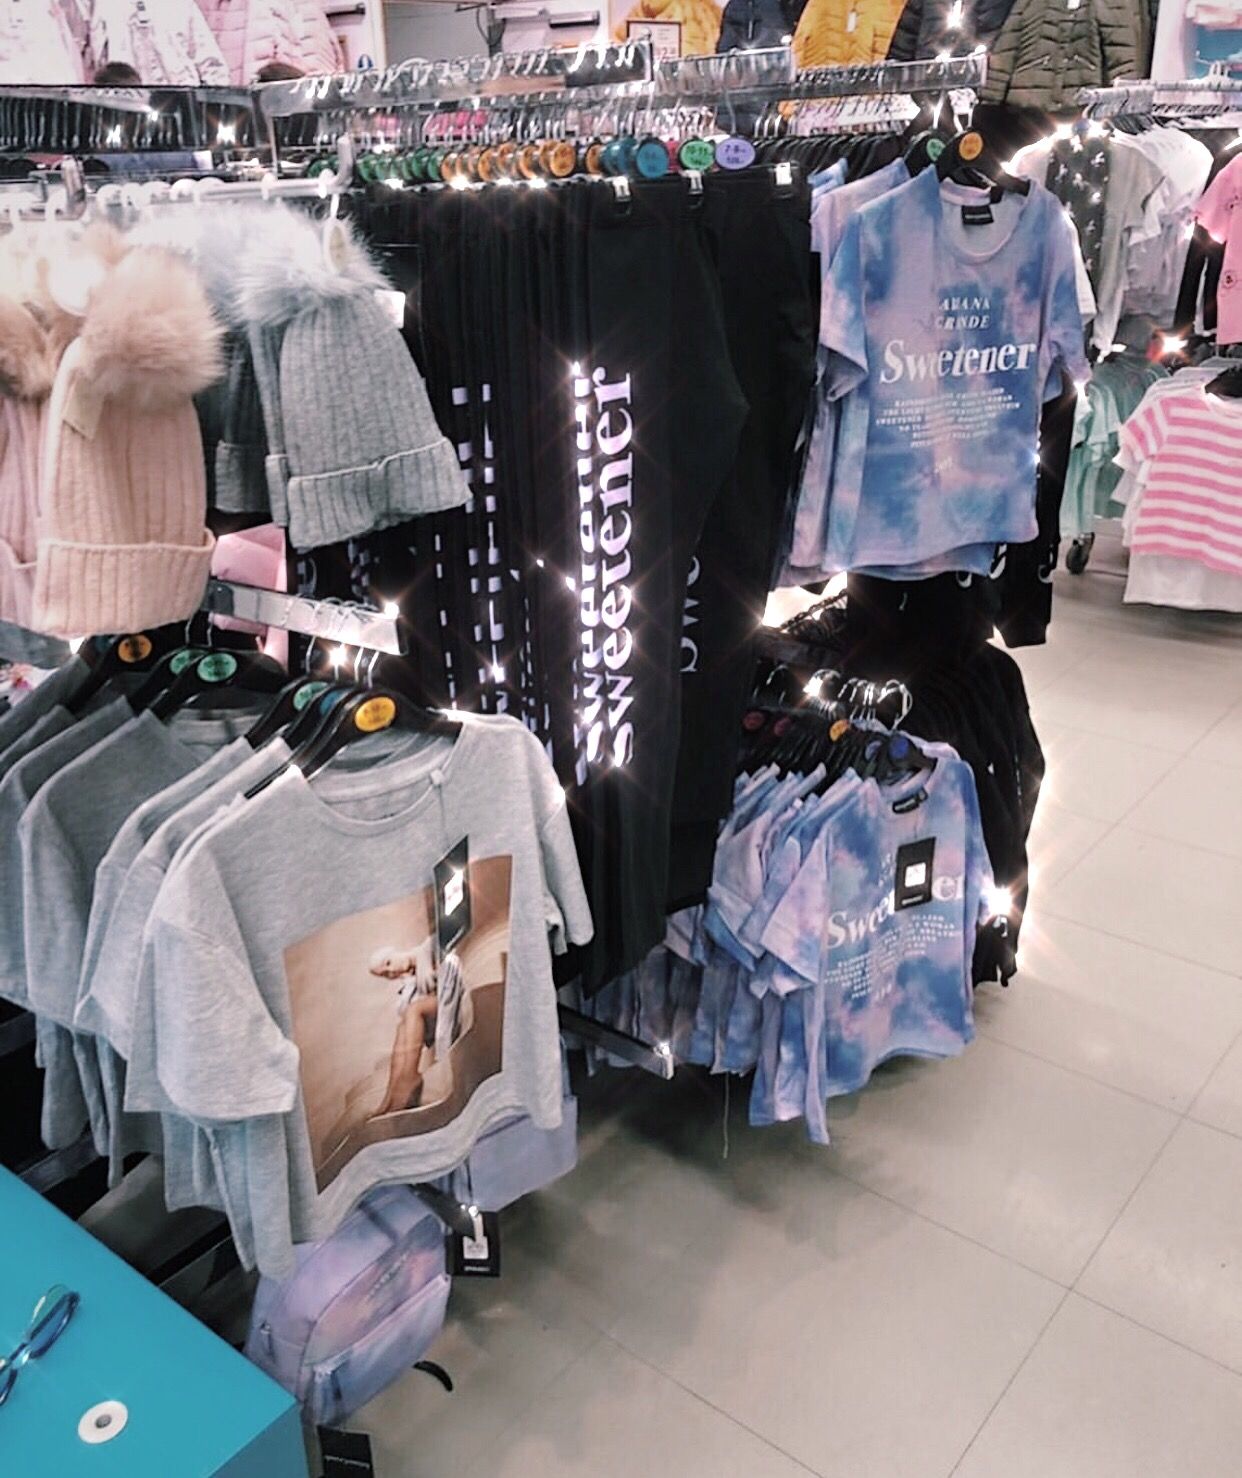 Express Your Love for Ariana Grande: Shop Official Merchandise